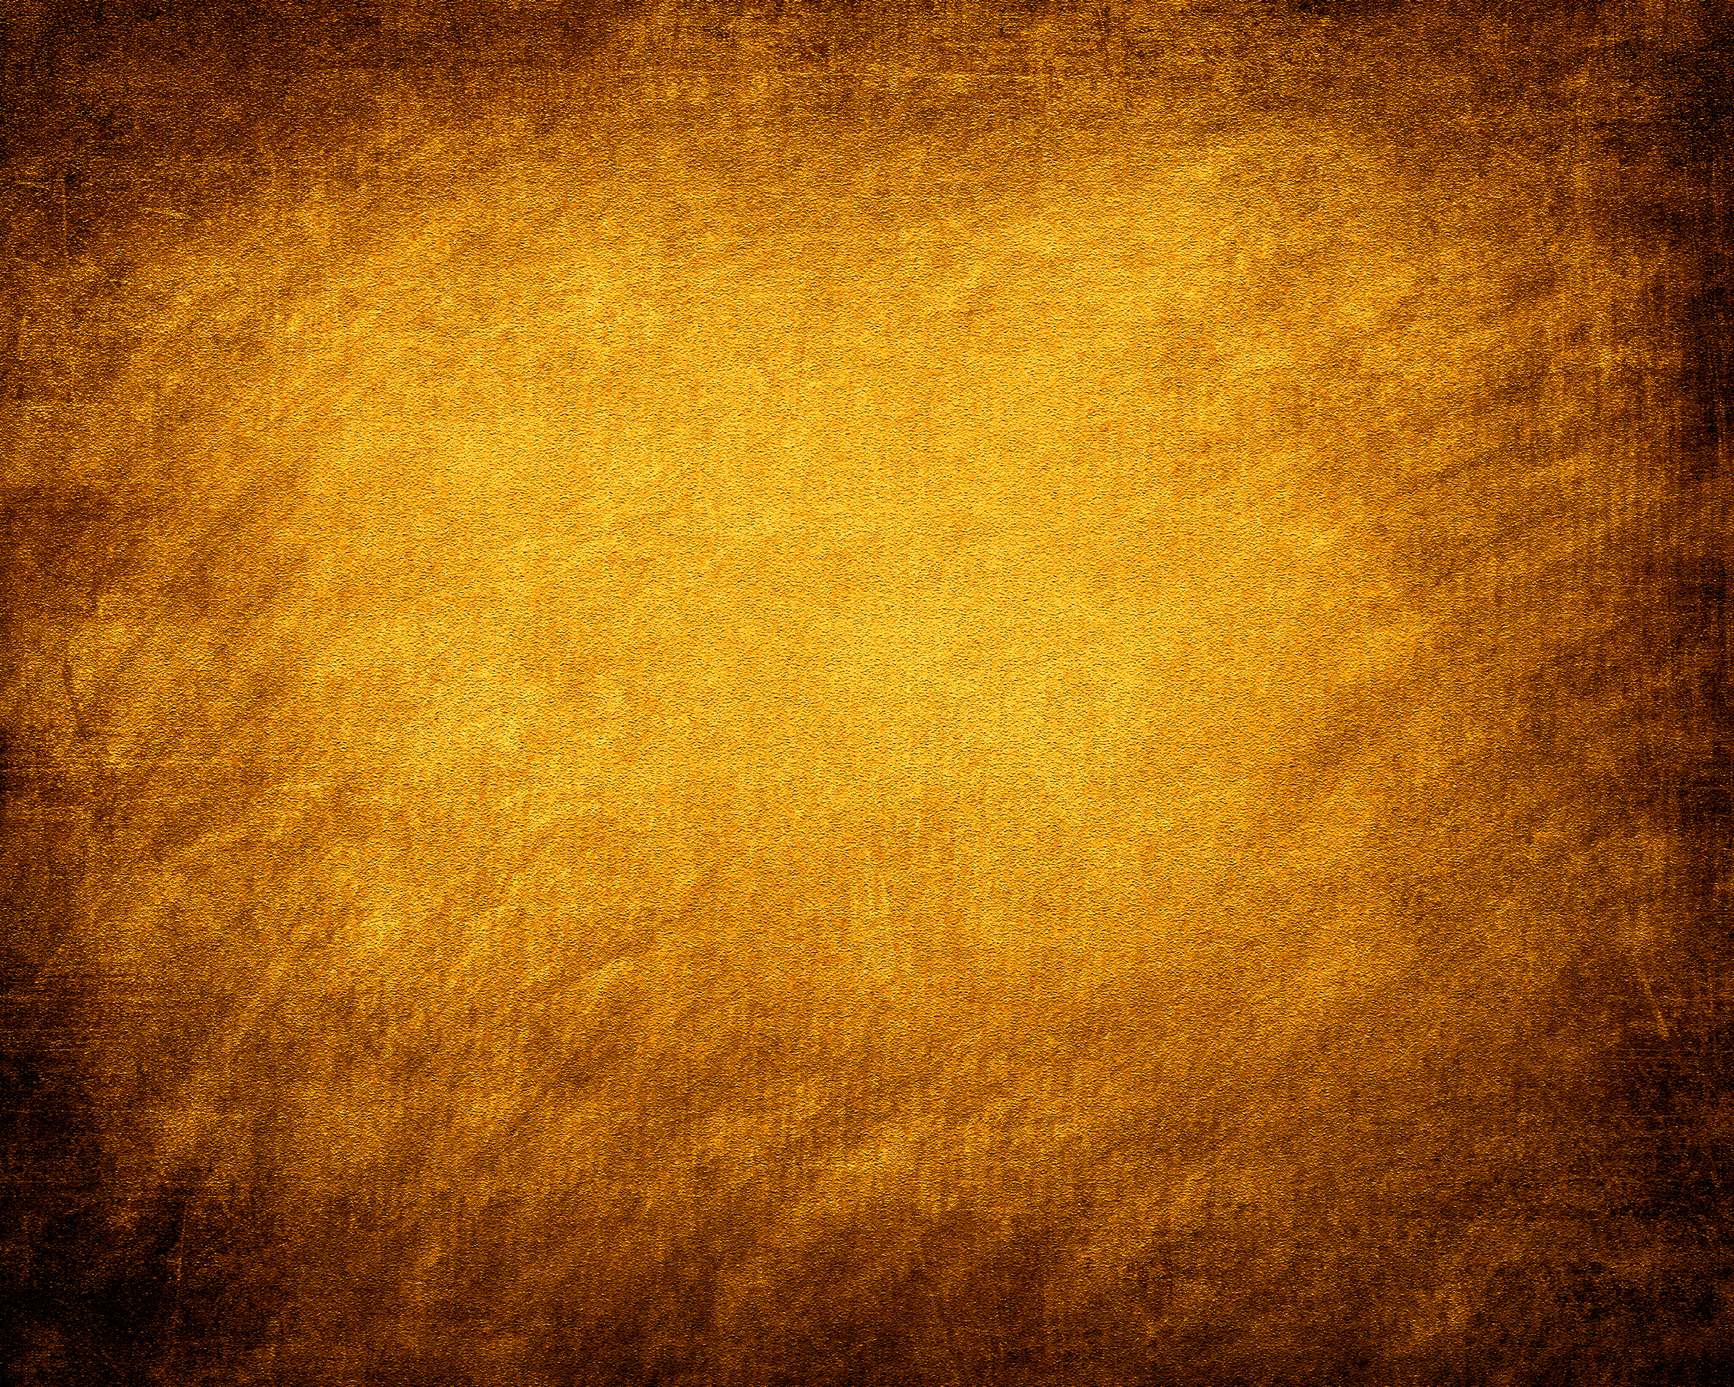 yellow-brown-wall-grunge-texture-background | East Village Times